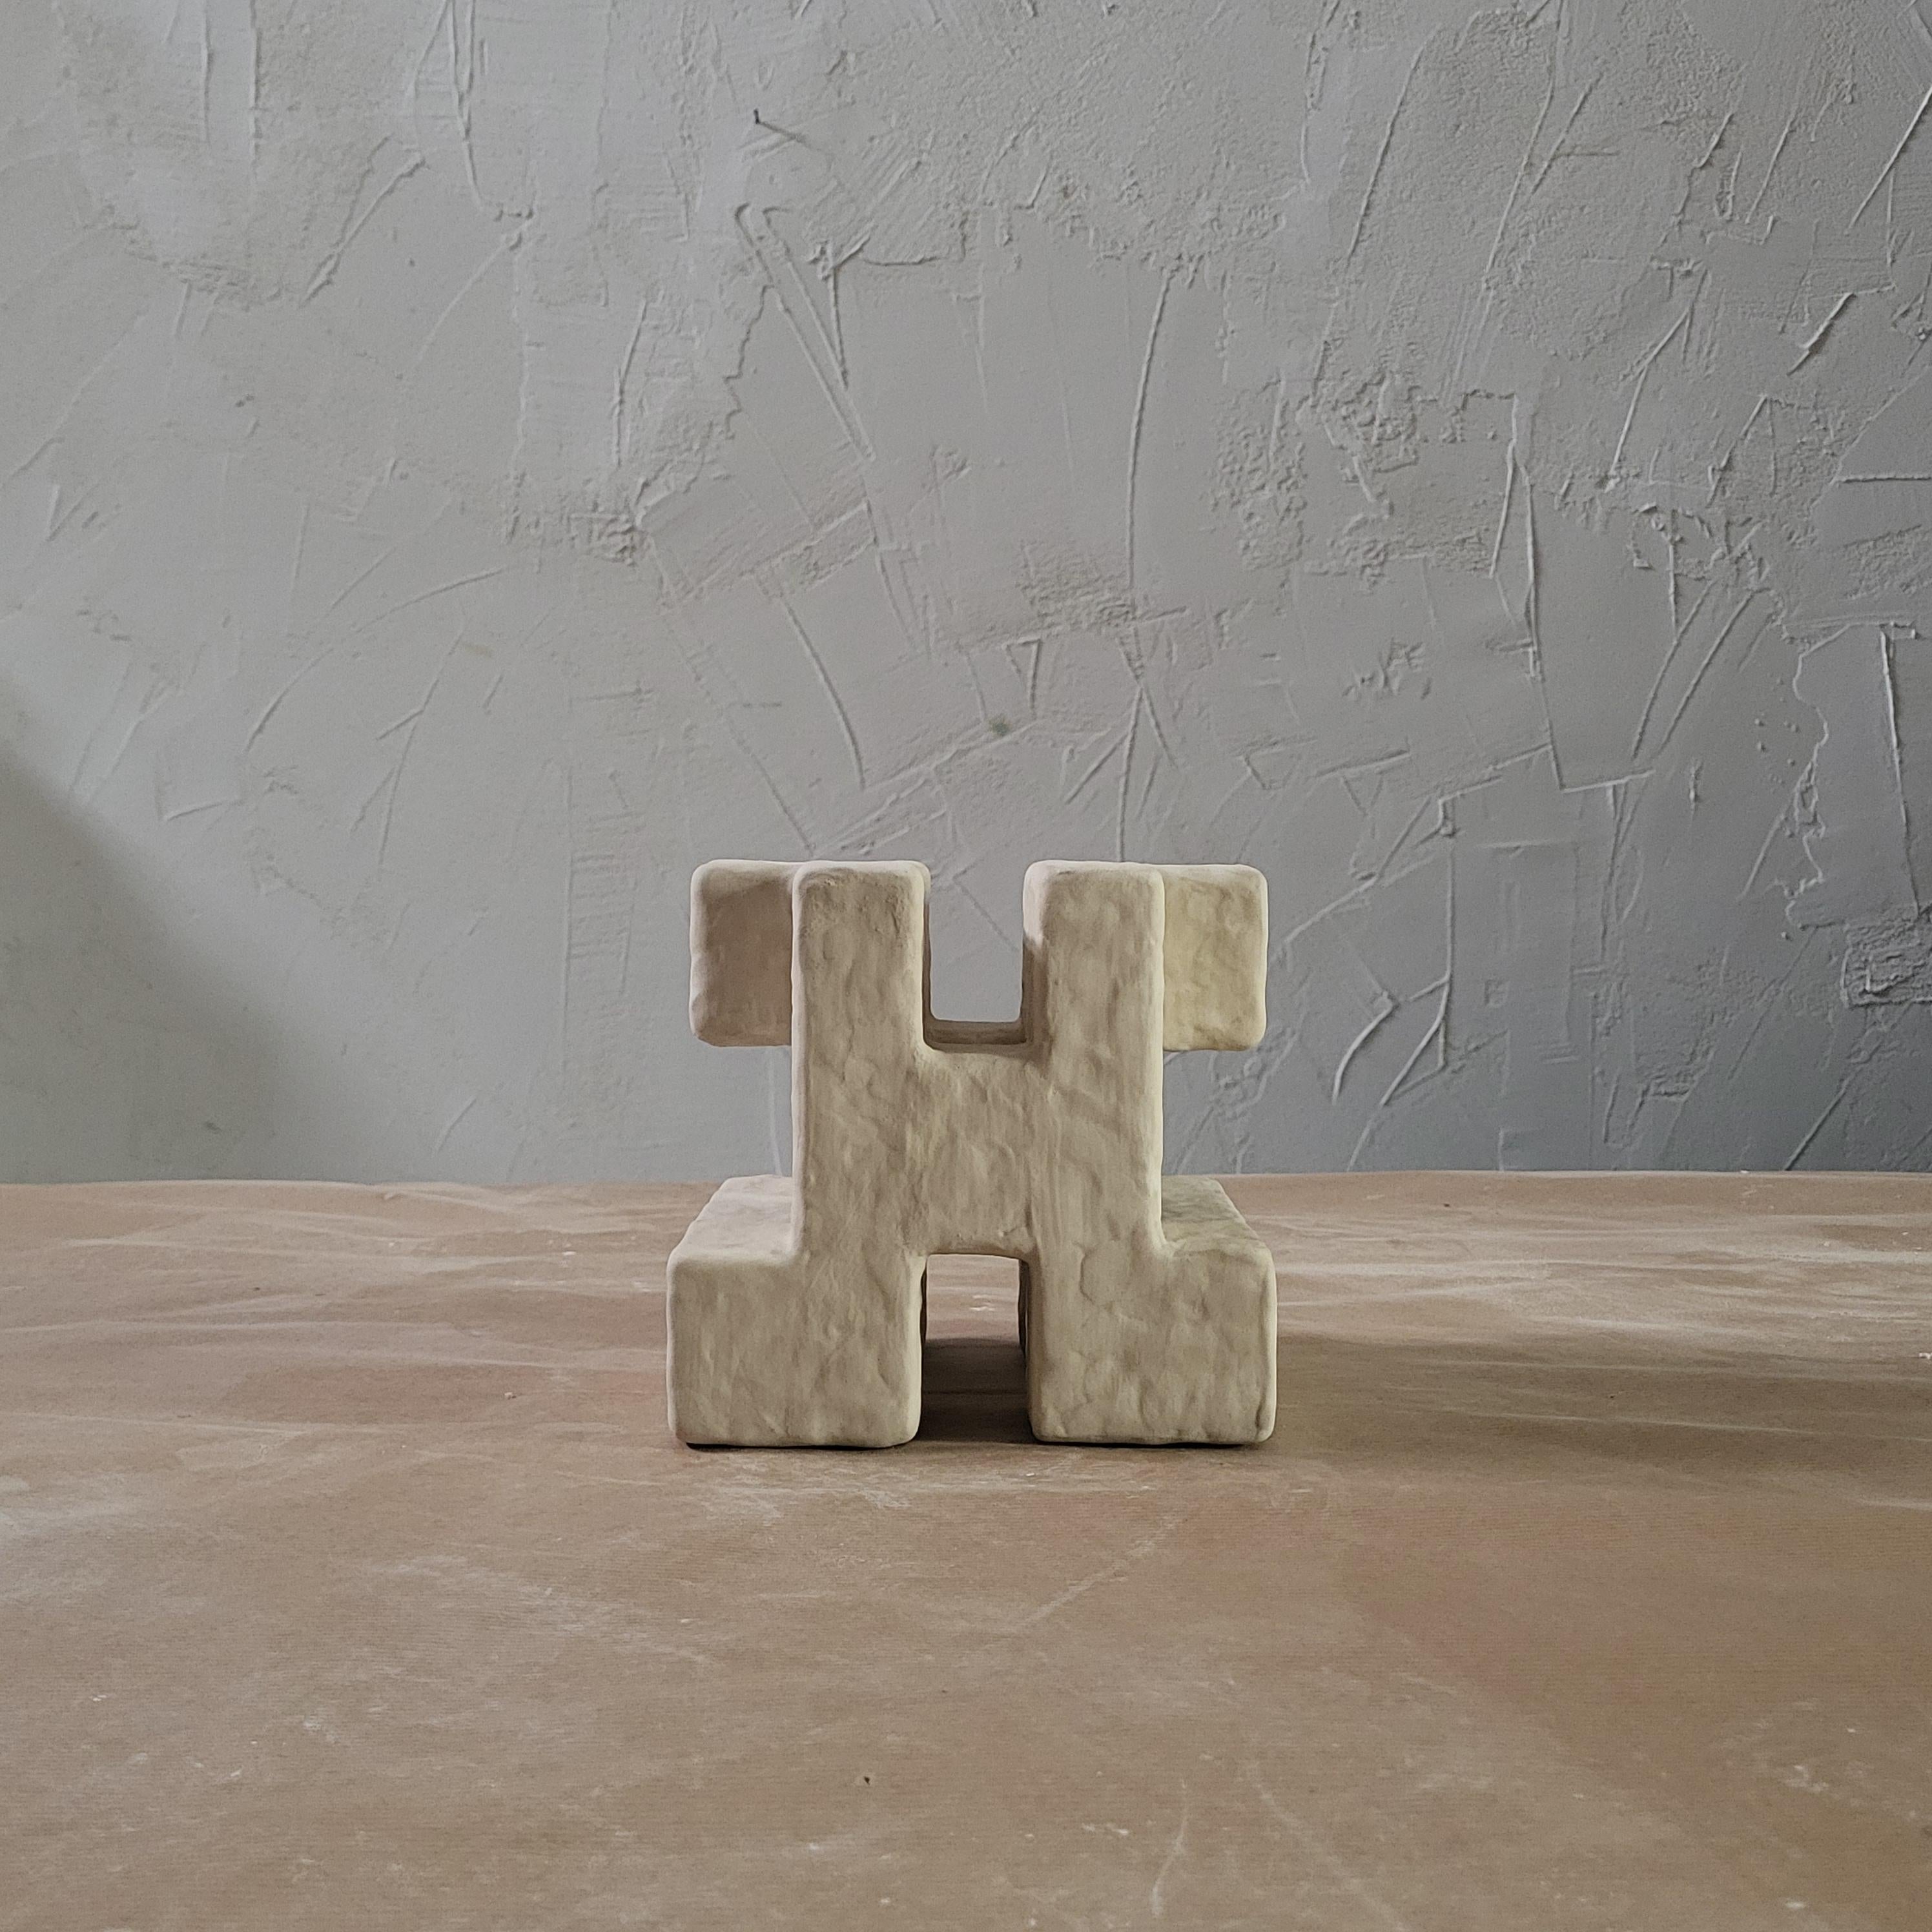 Hypercube II

We discovered organic plaster stucco when we arrived at our workshop in Seville. Artisans dedicated to the world of Holy Week in Seville work in the same space and the 